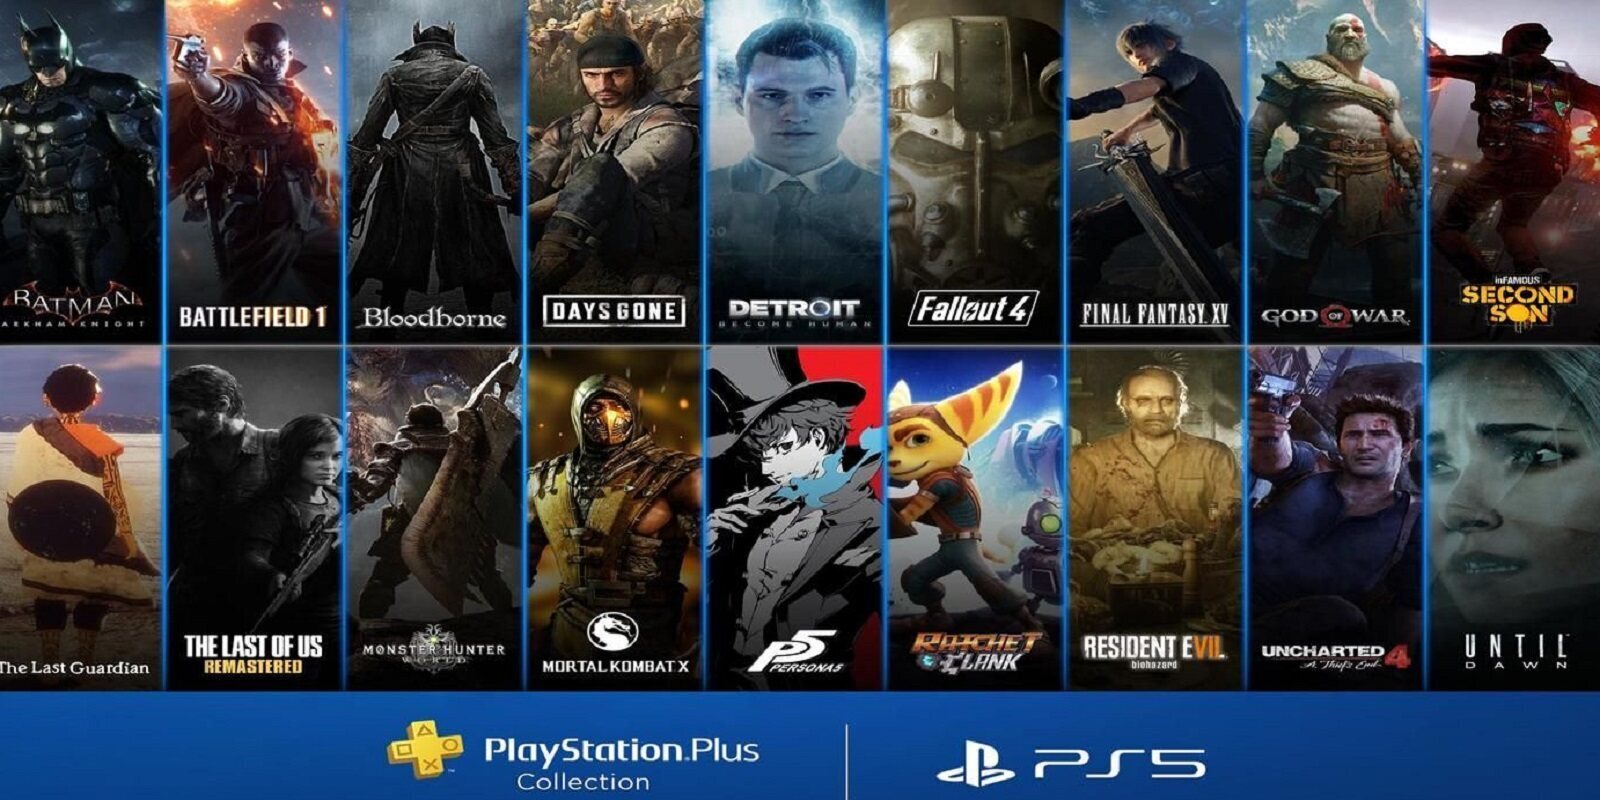 Playstation игры месяца. PS Plus ps5. Коллекция игр PS collection ps5. PS Plus ps4. PLAYSTATION Plus collection PS 5.